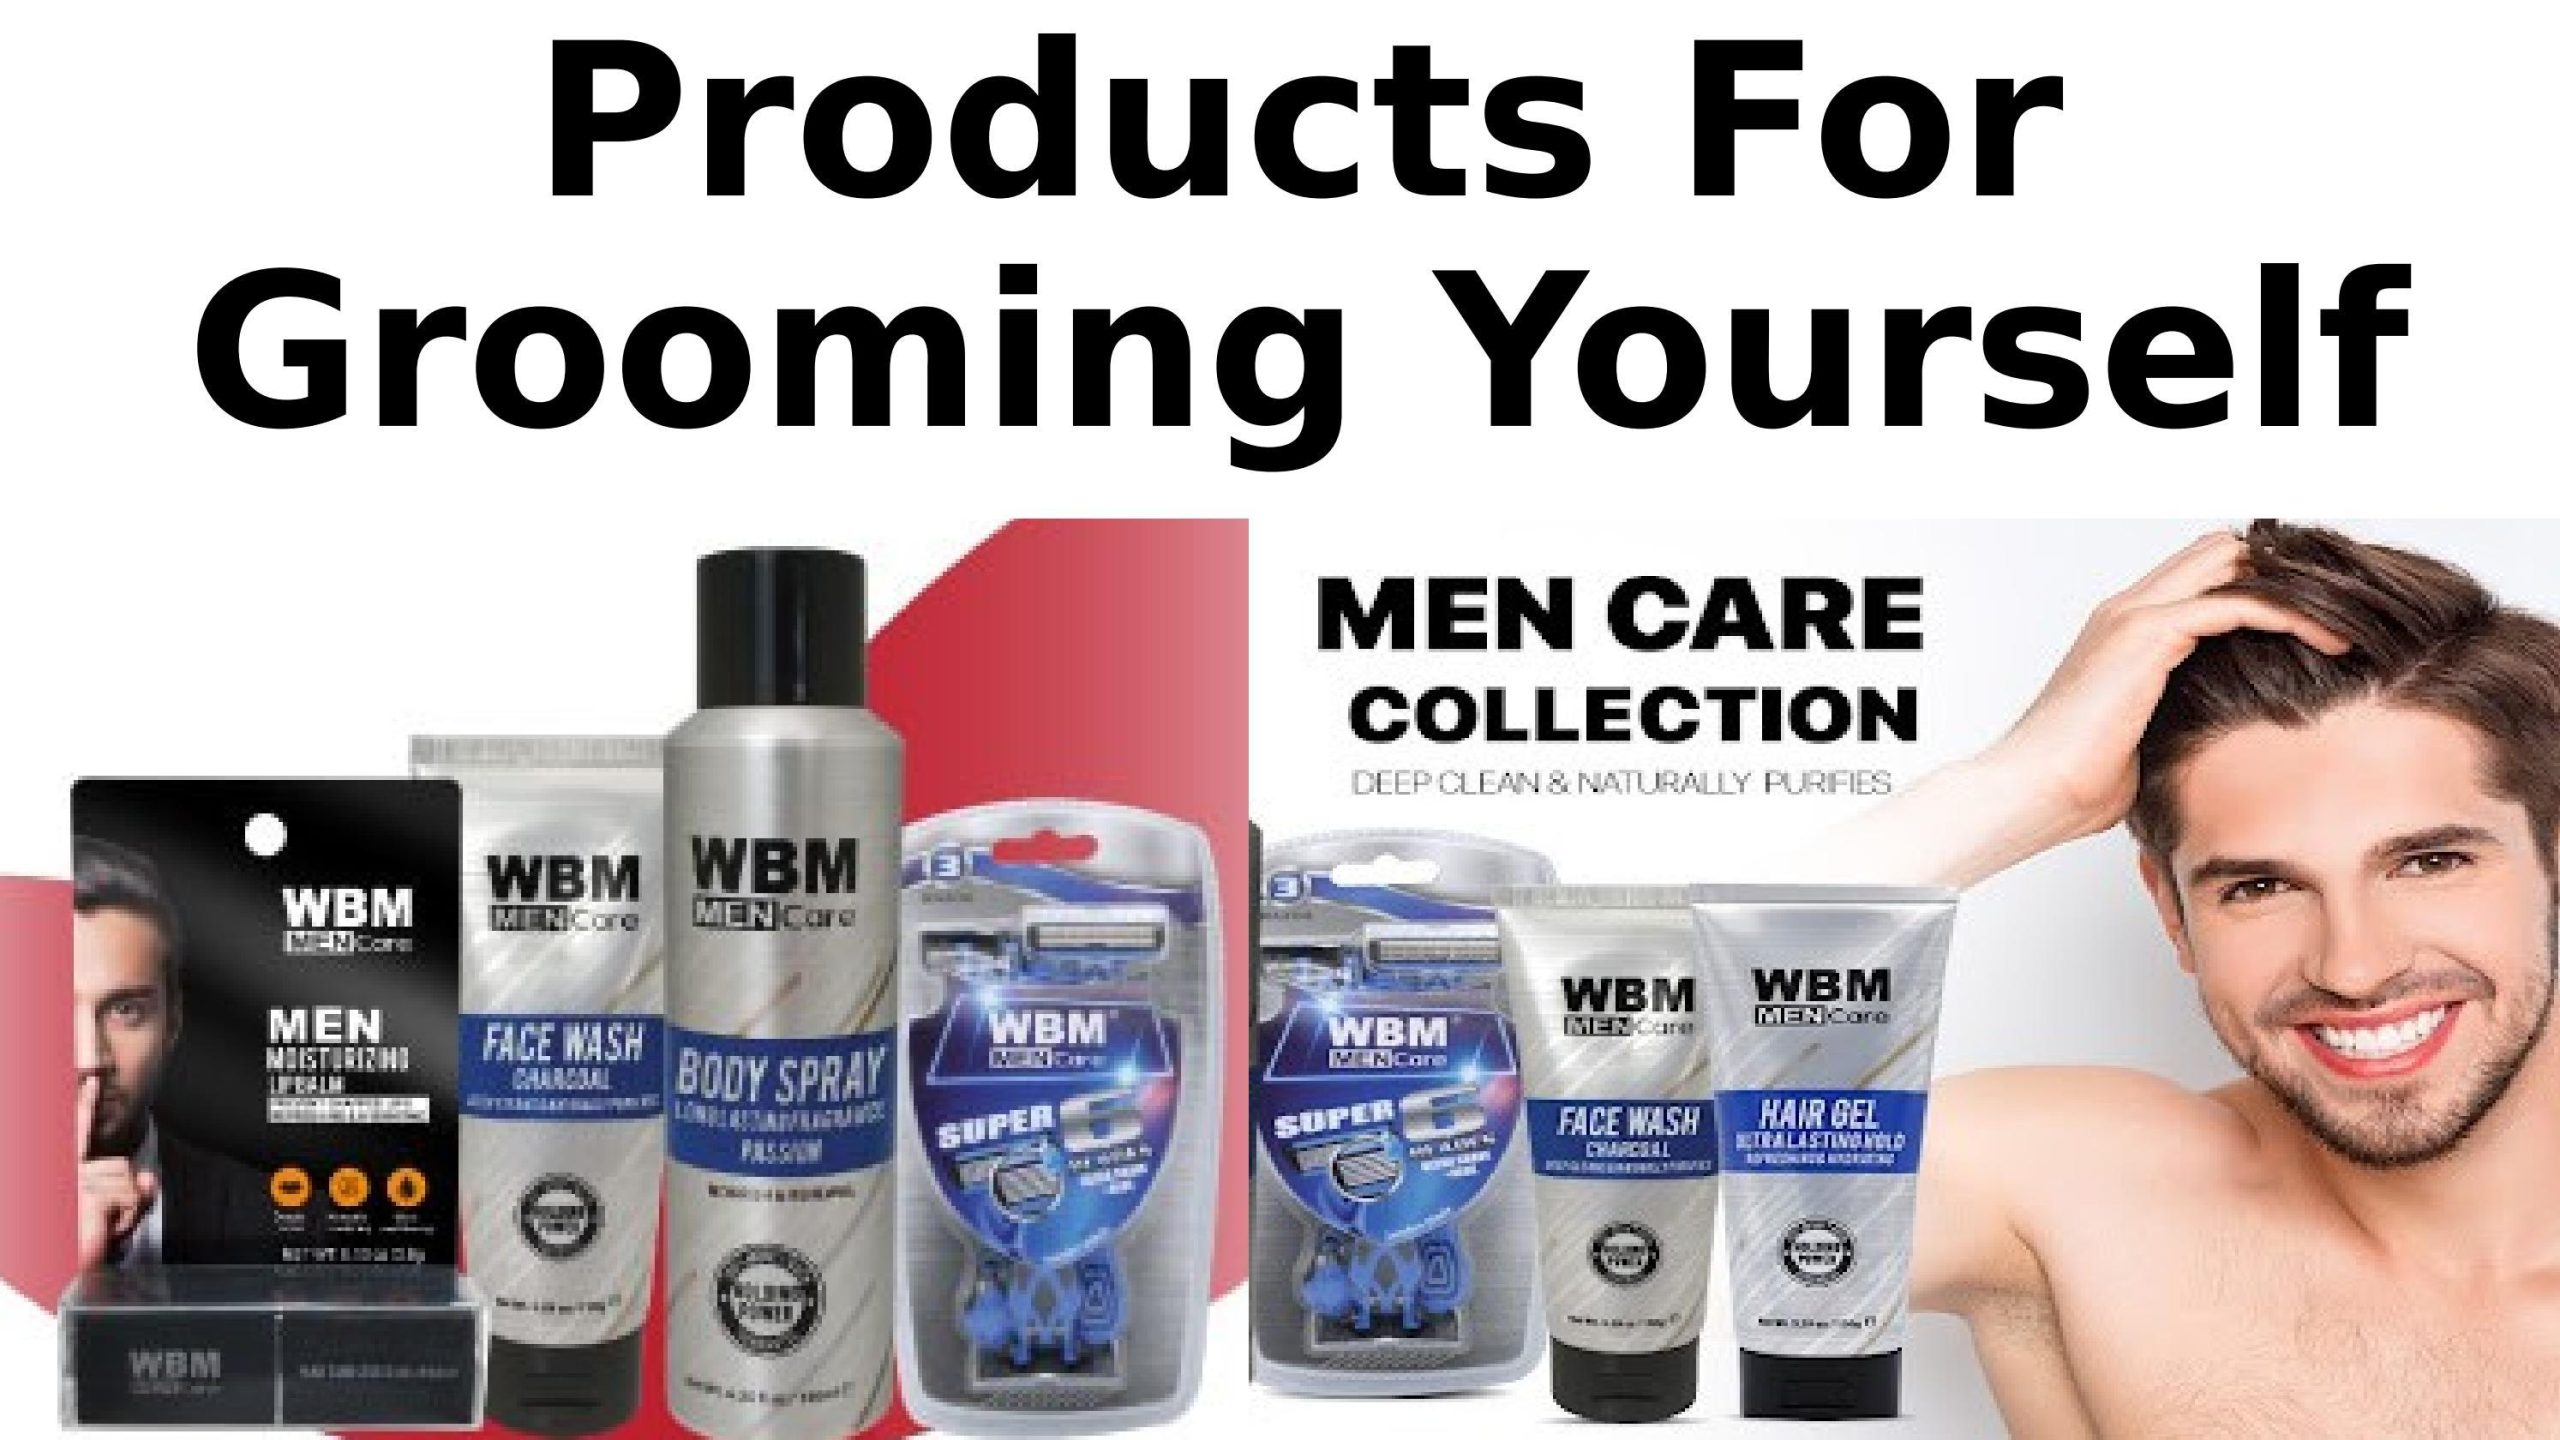 Men Care Collection by WBM